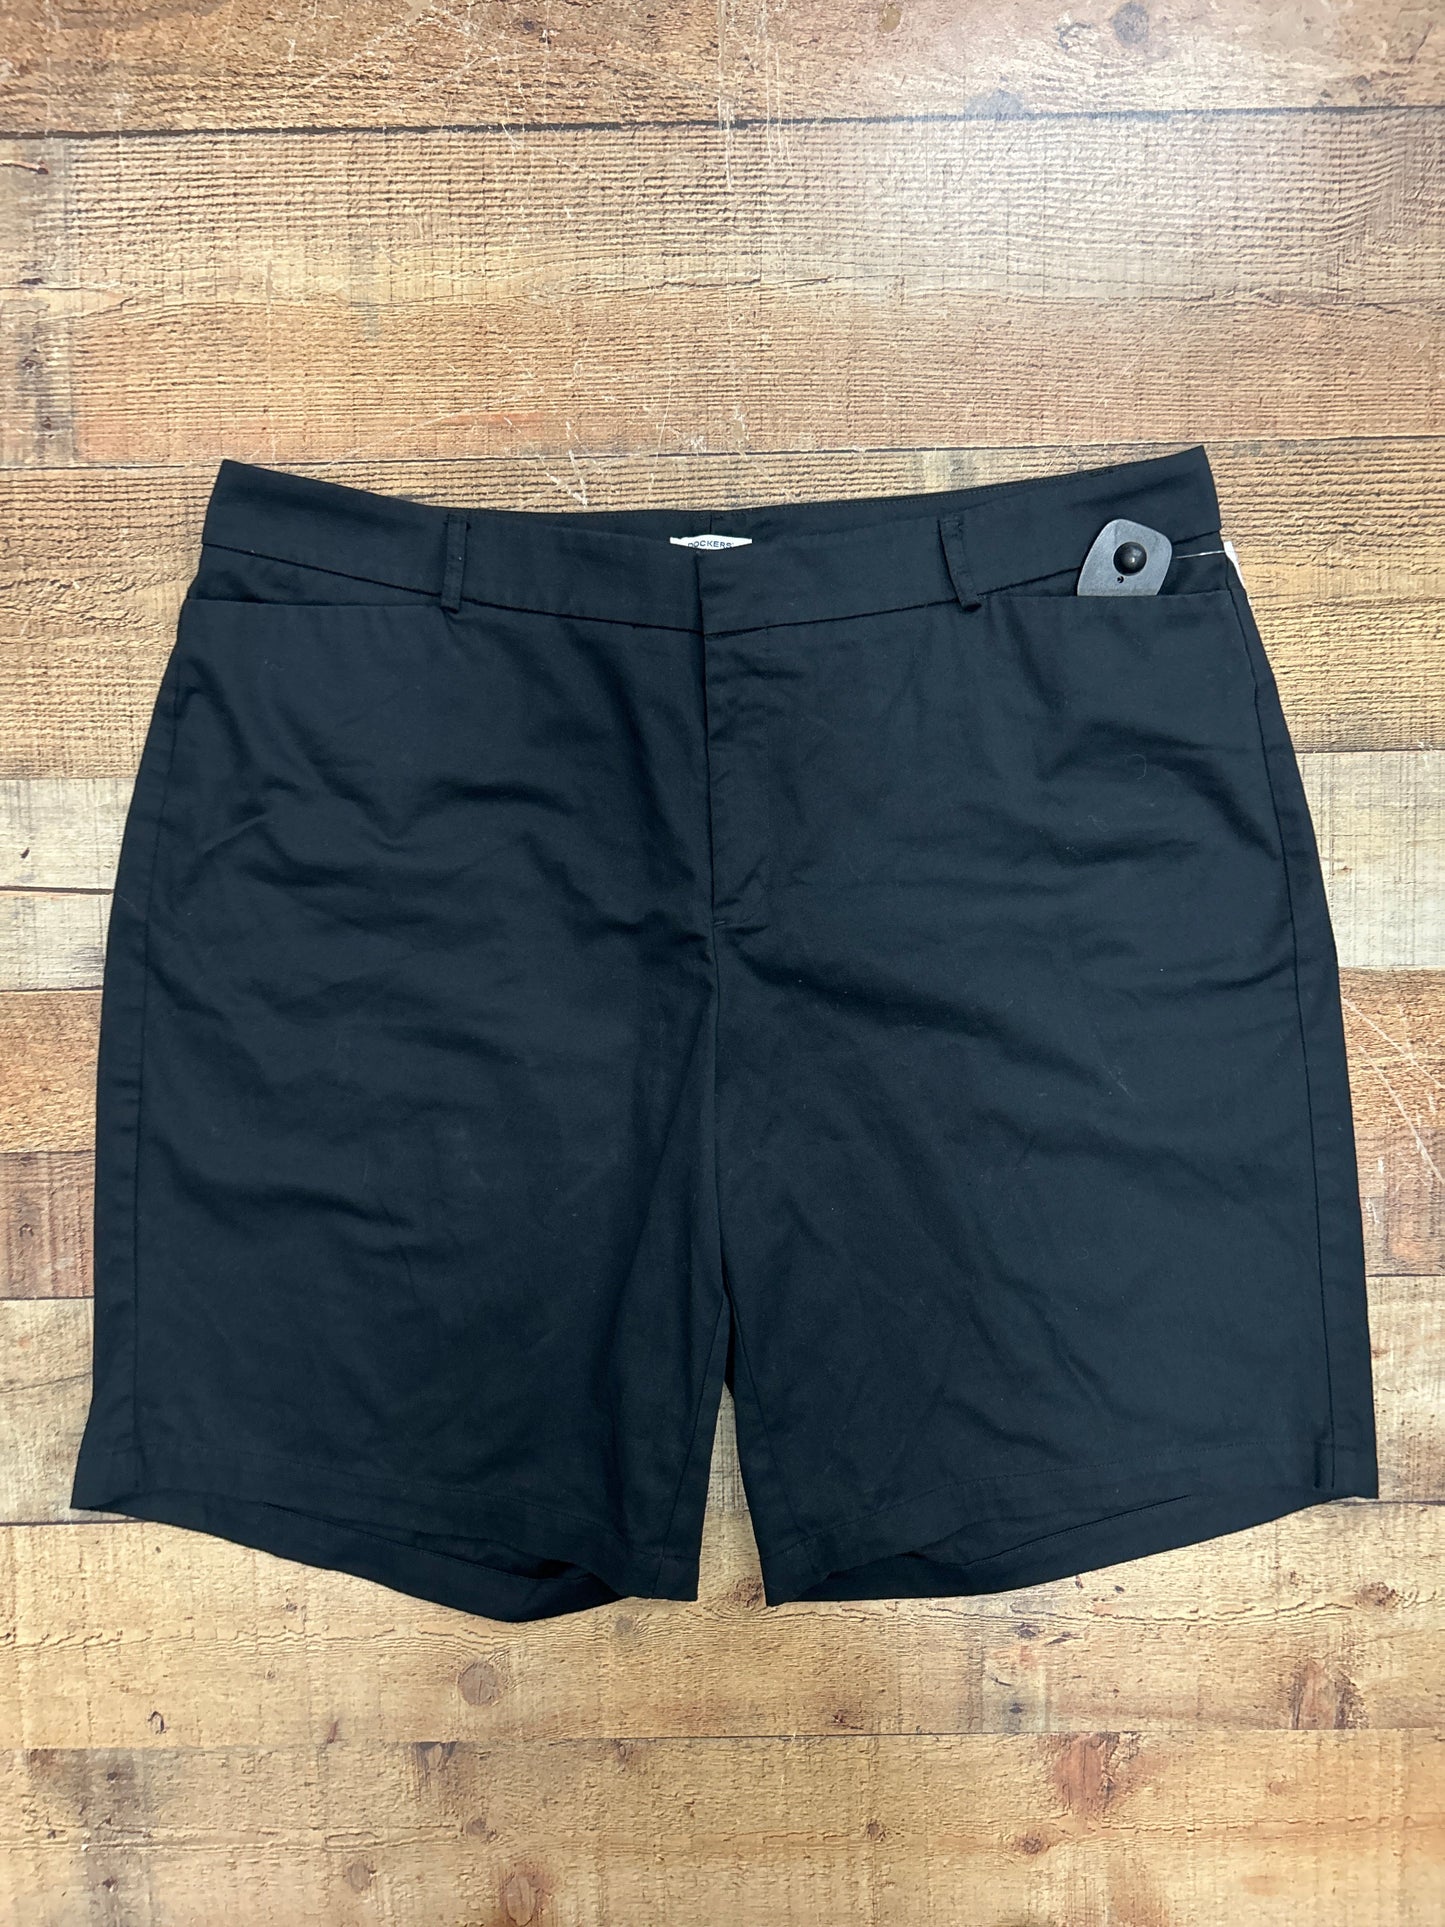 Shorts By Dockers  Size: 20